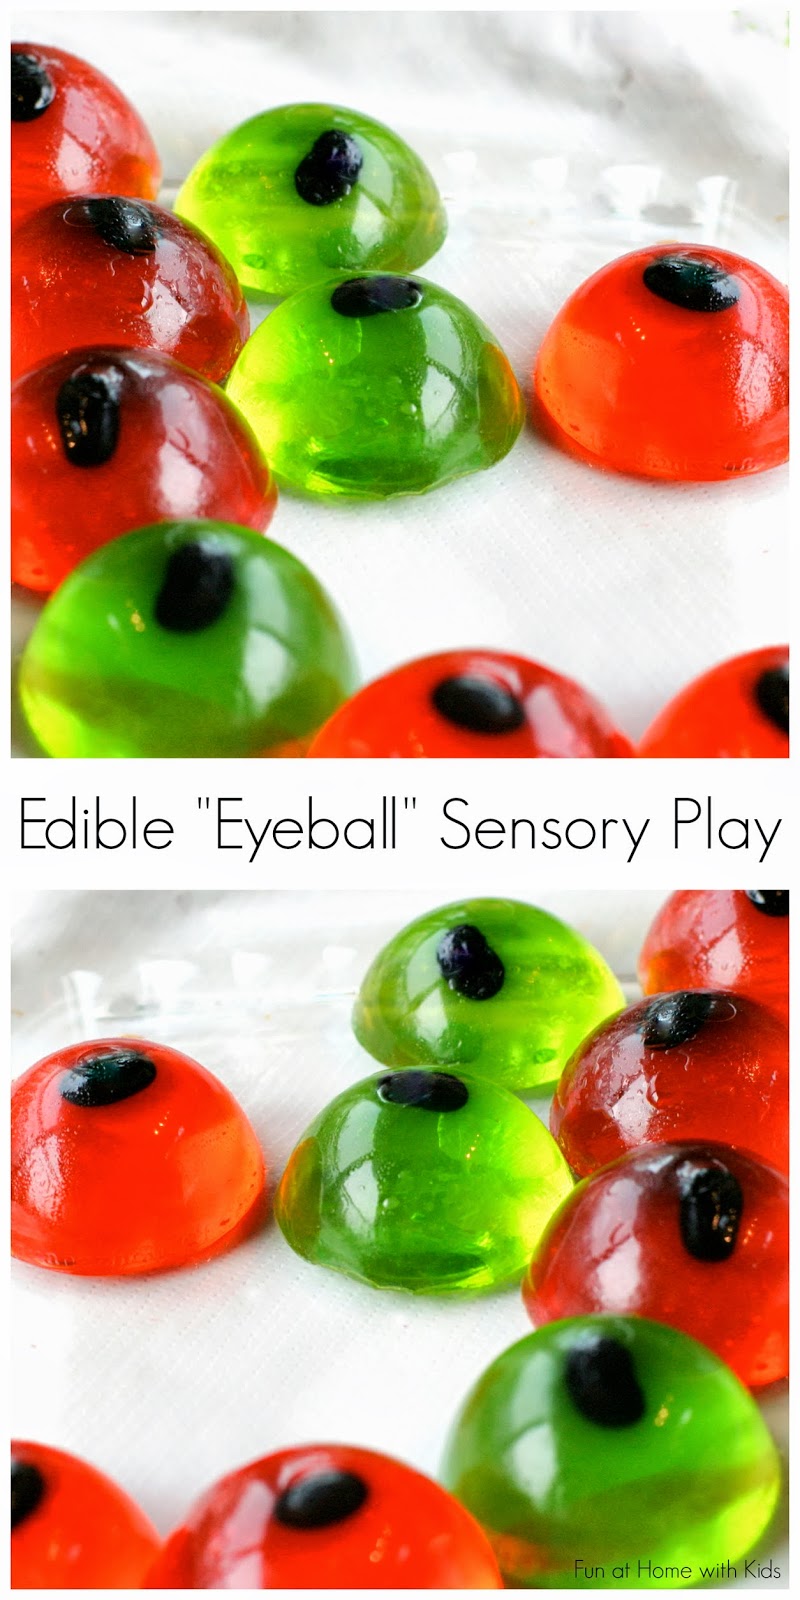 Edible Eyeball Sensory Play - an all ages bin you can put together over and over again or read at the end of the post how to modify the recipe to make a tasty Halloween snack/treat.  From Fun at Home with Kids.